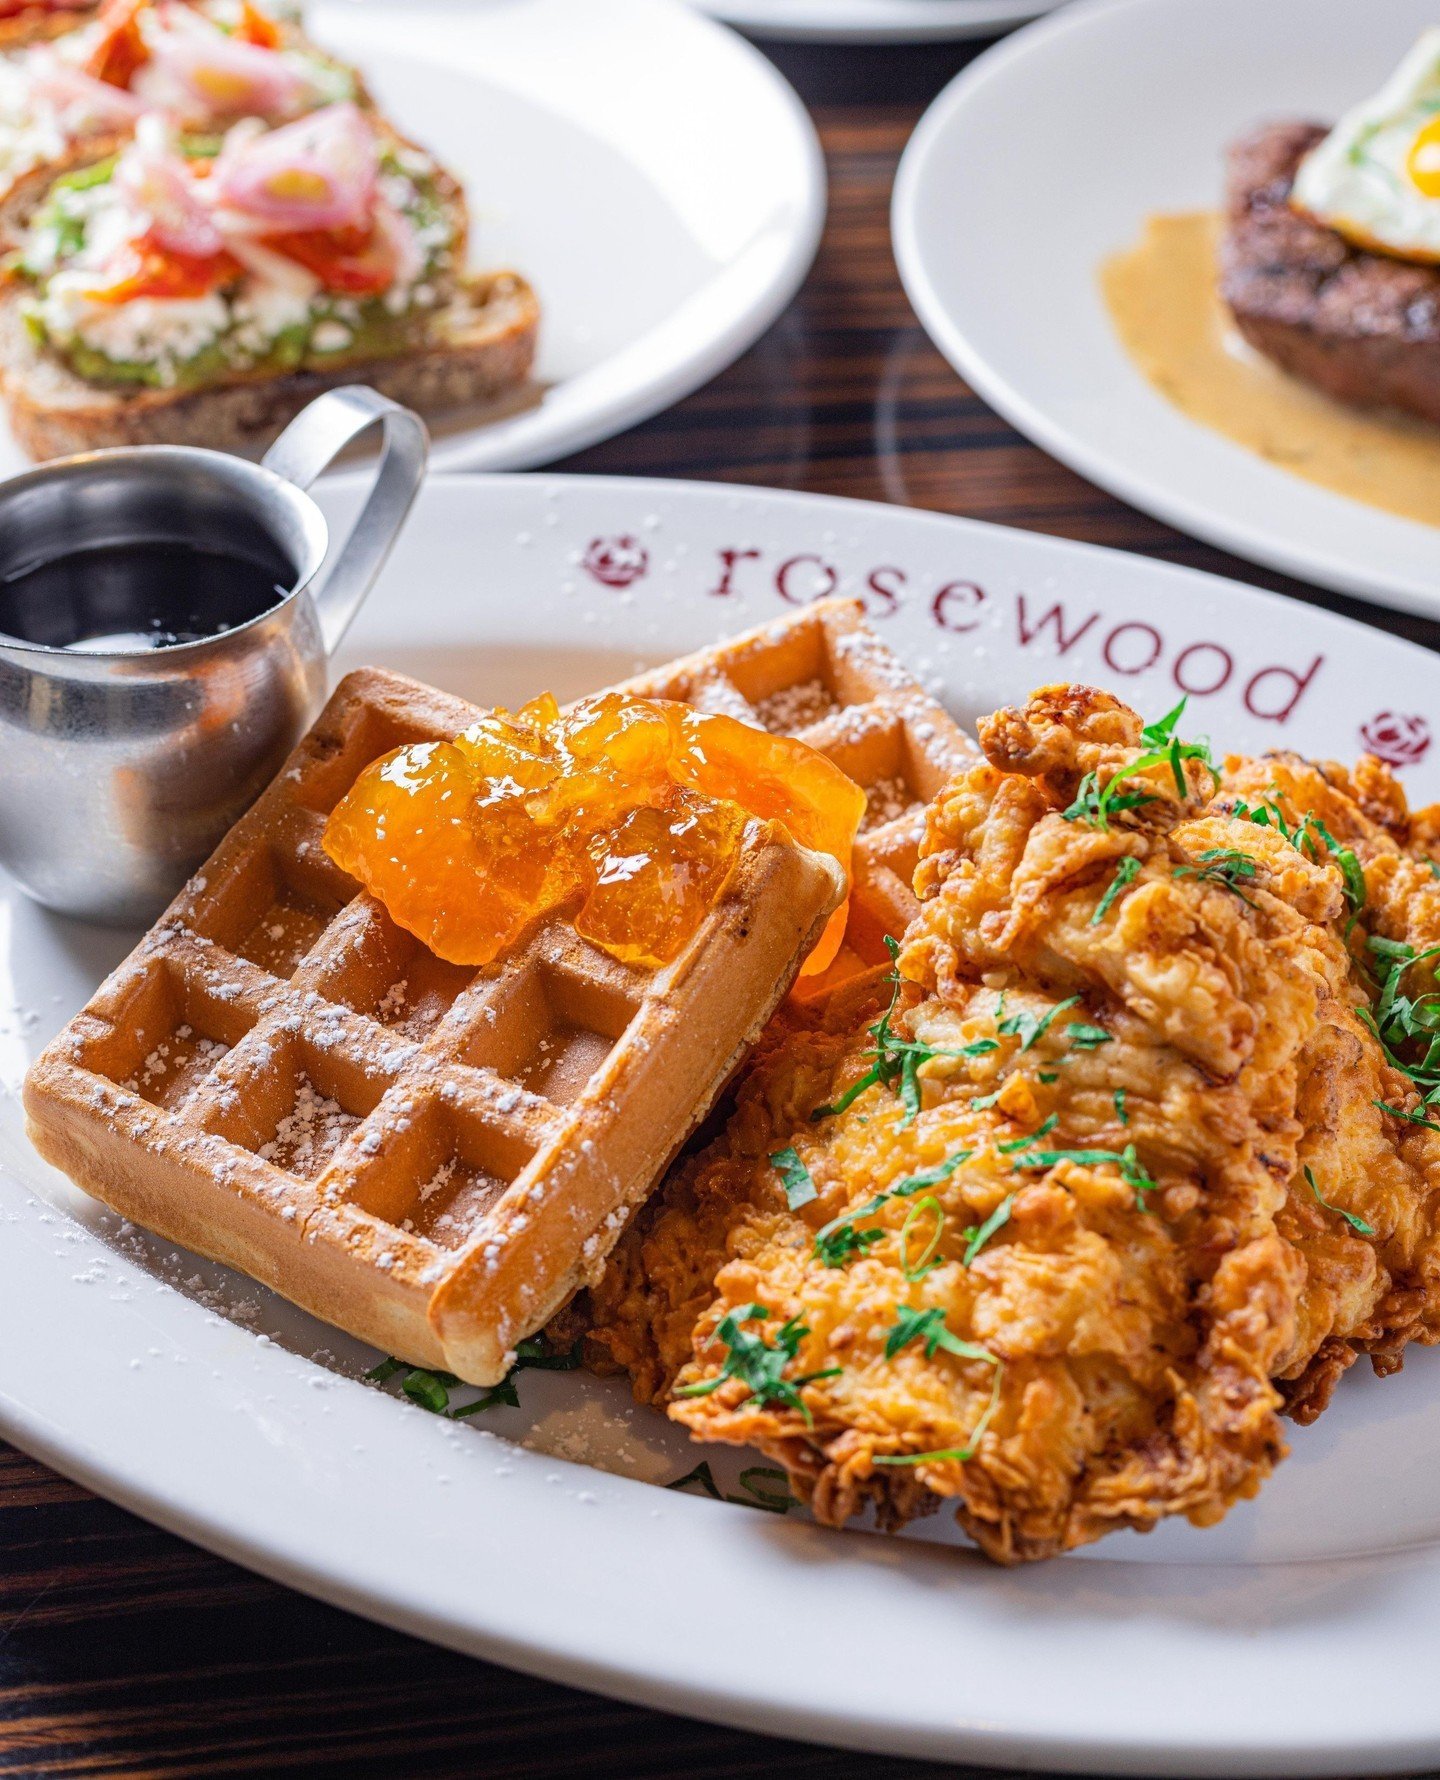 Chicken &amp; Waffles are calling your name! 🍗🧇⁠
⁠
Brunch at Rosewood Grill every Sunday from 10am to 2pm.